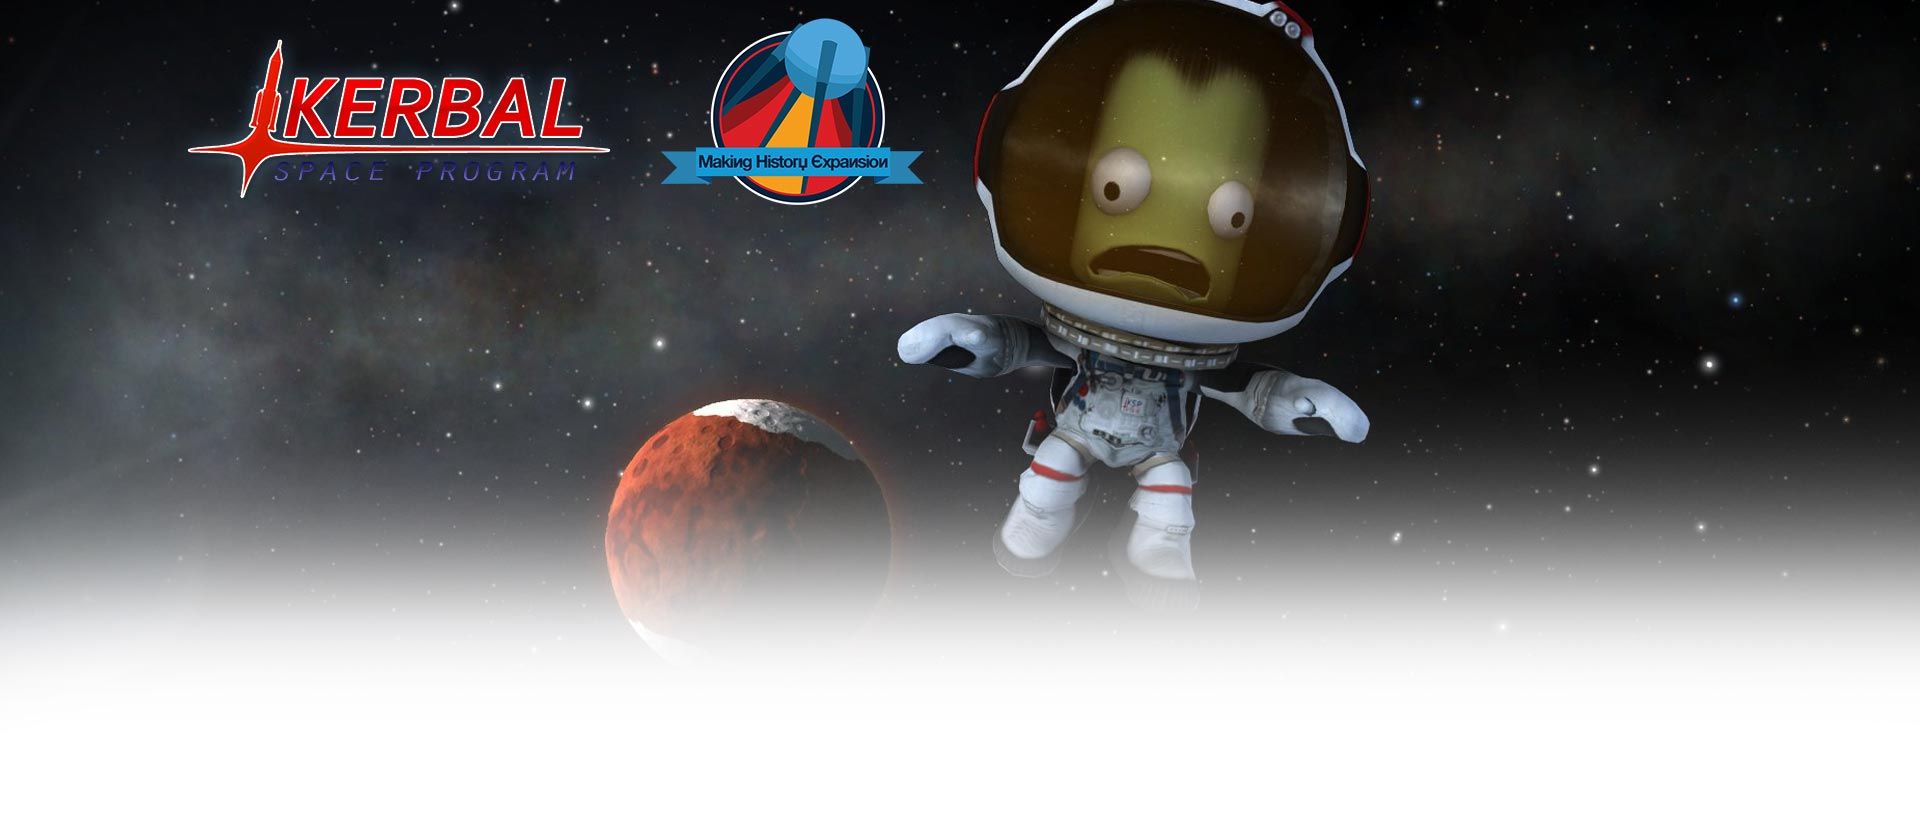 Kerbal space program: making history expansion download for mac osx